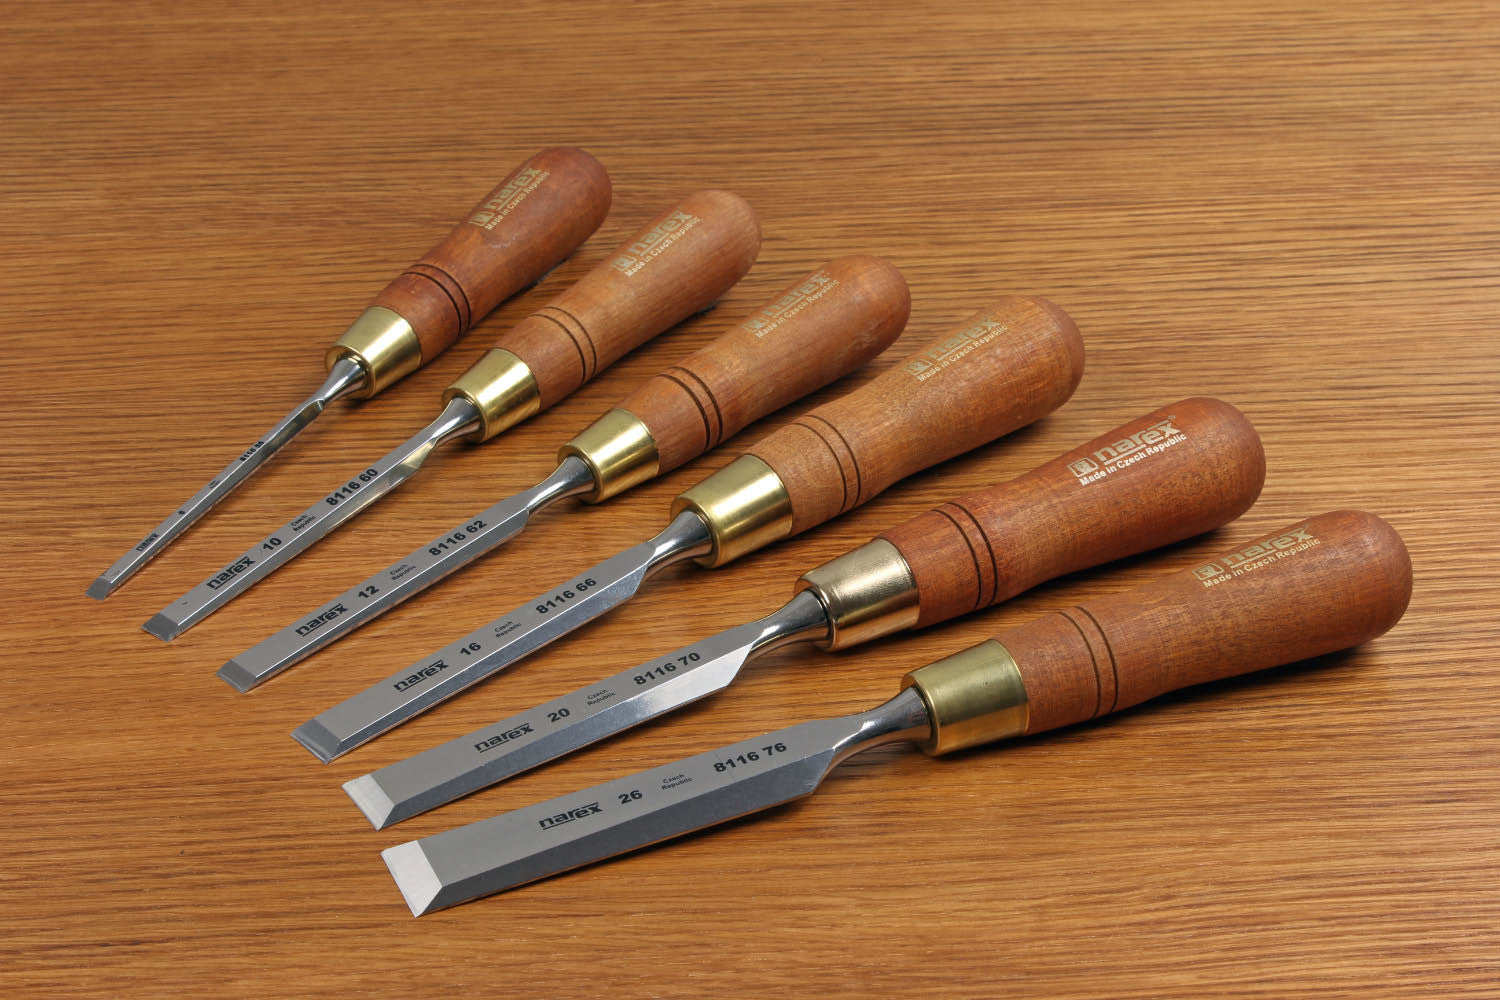 Narex woodworking chisels